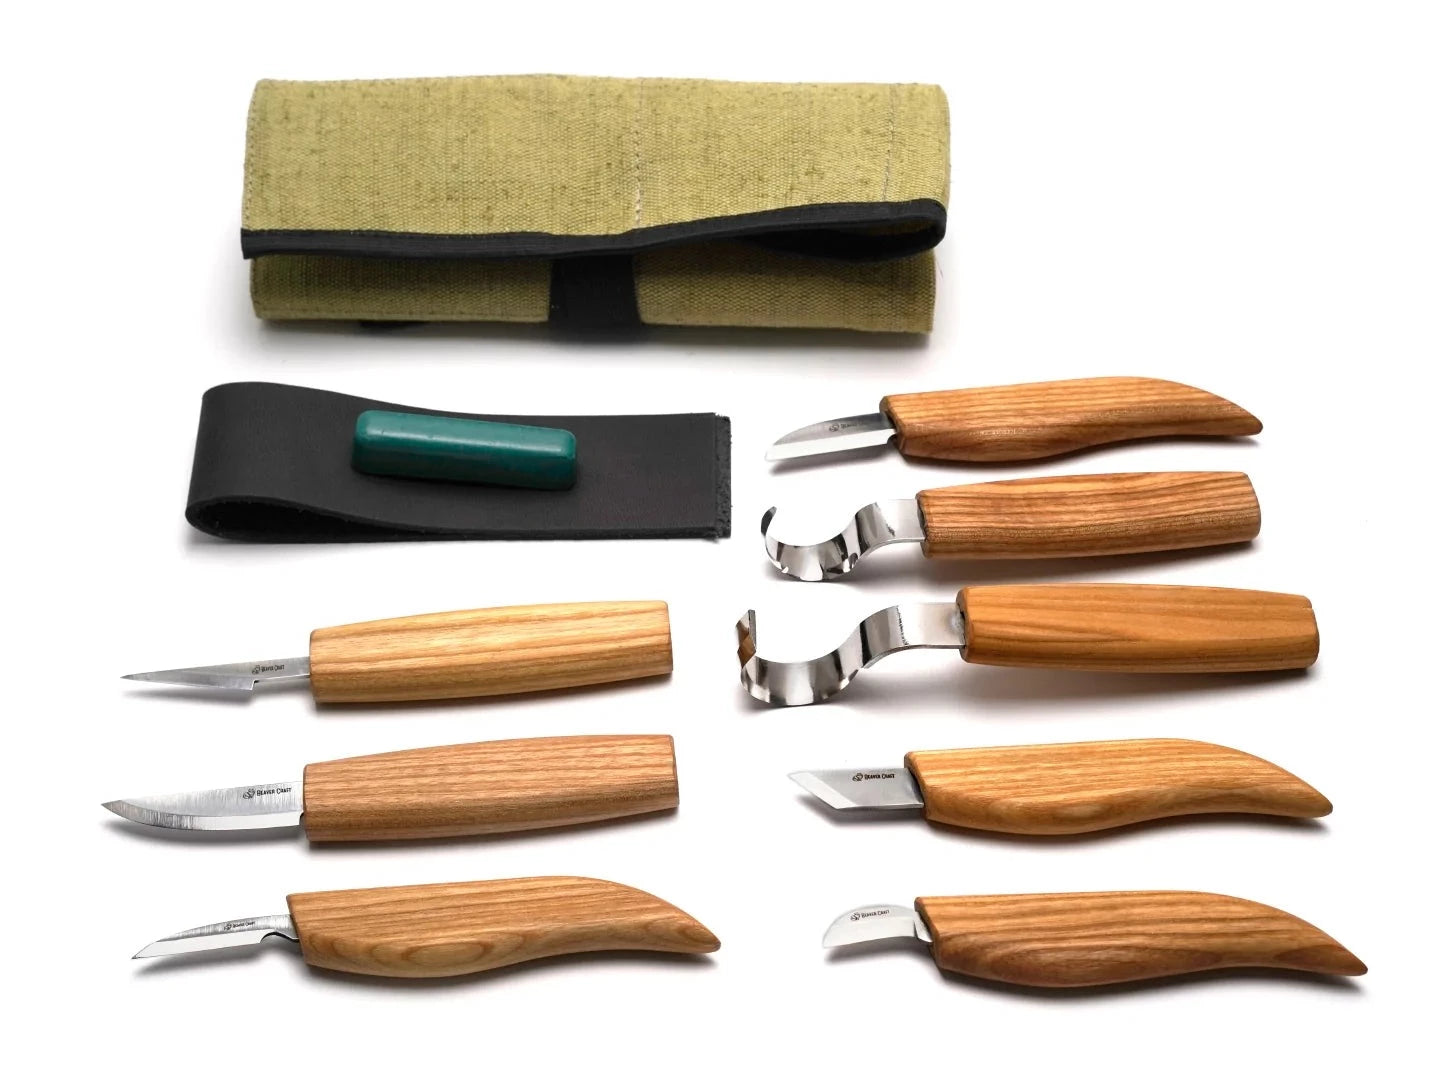 Wood Carving Knives: How To Use These Important Carving Tools? –  BeaverCraft Tools